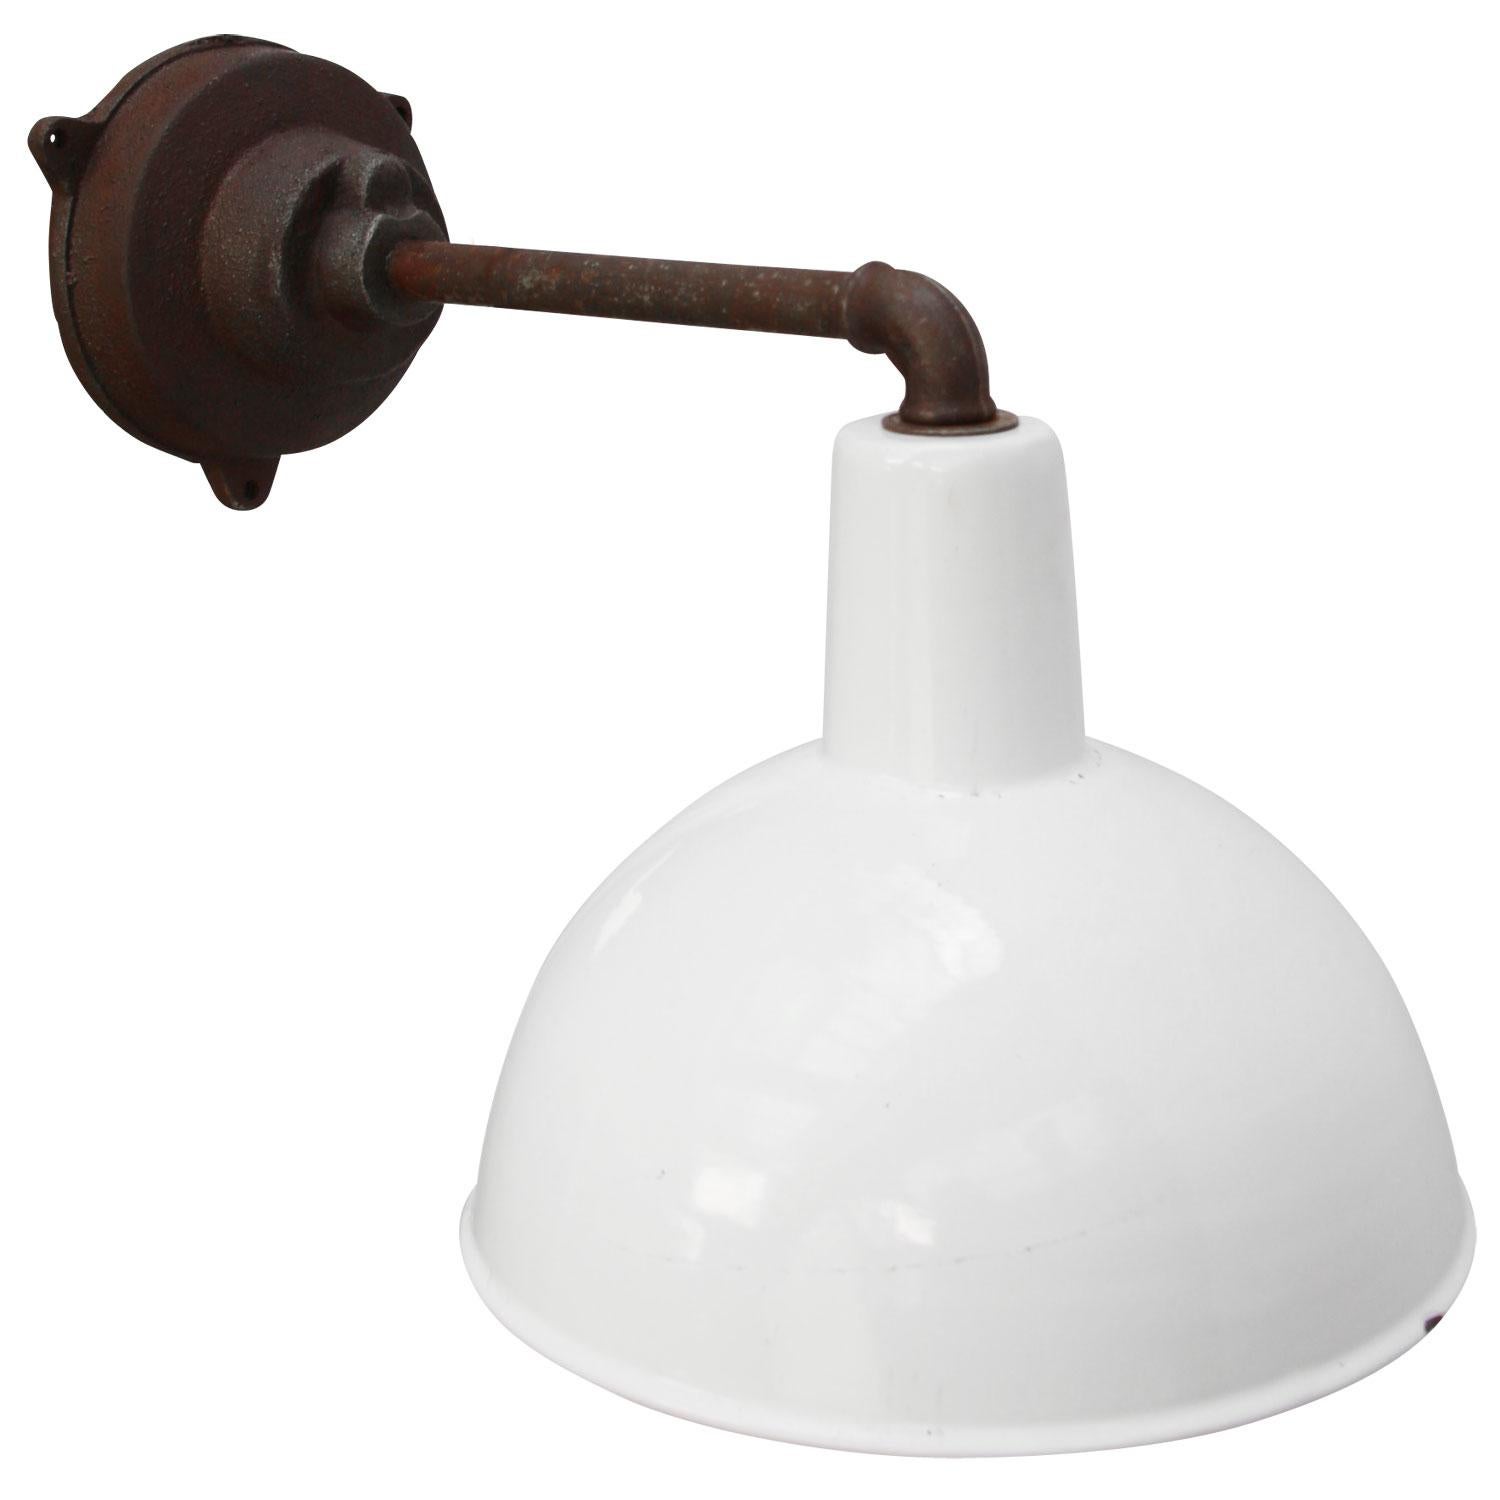 Factory wall light
white enamel, white interior

Diameter cast iron wall piece: 12 cm, 3 holes to secure

E27 / E26

Weight: 3.00 kg / 6.6 lb

Priced per individual item. All lamps have been made suitable by international standards for